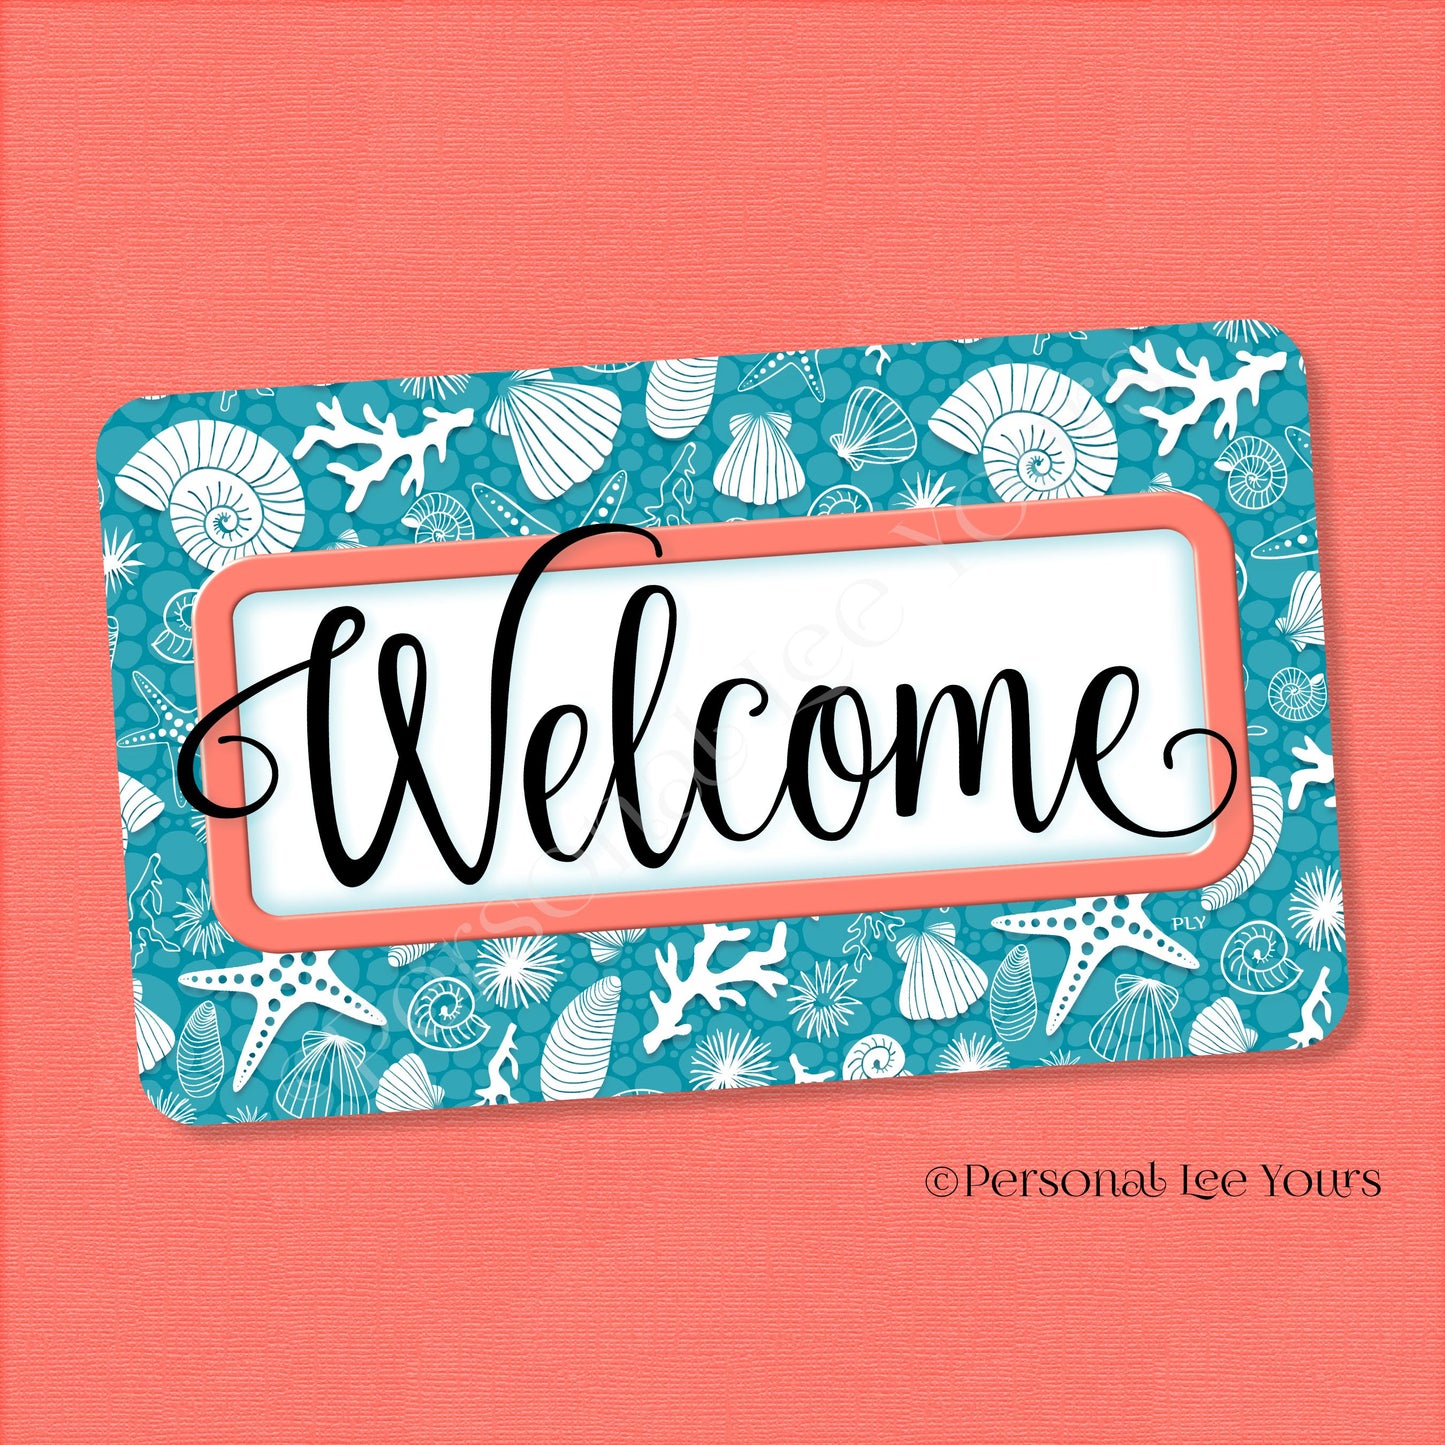 Simple Welcome Wreath Sign * Coastal Teal and Coral * Horizontal * Lightweight Metal